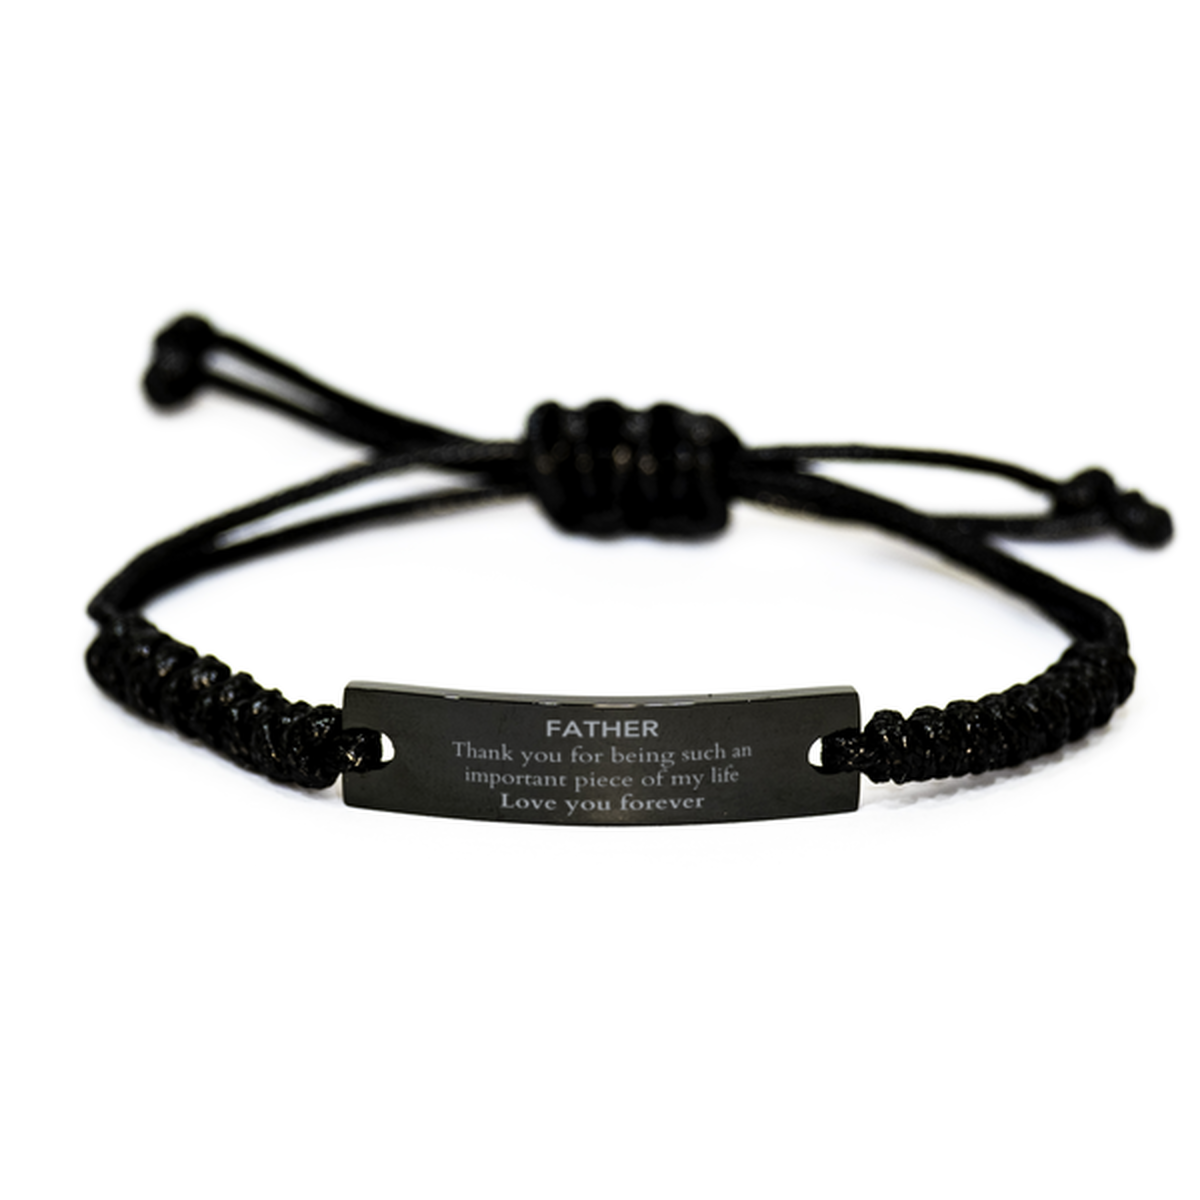 Appropriate Father Black Rope Bracelet Epic Birthday Gifts for Father Thank you for being such an important piece of my life Father Christmas Mothers Fathers Day